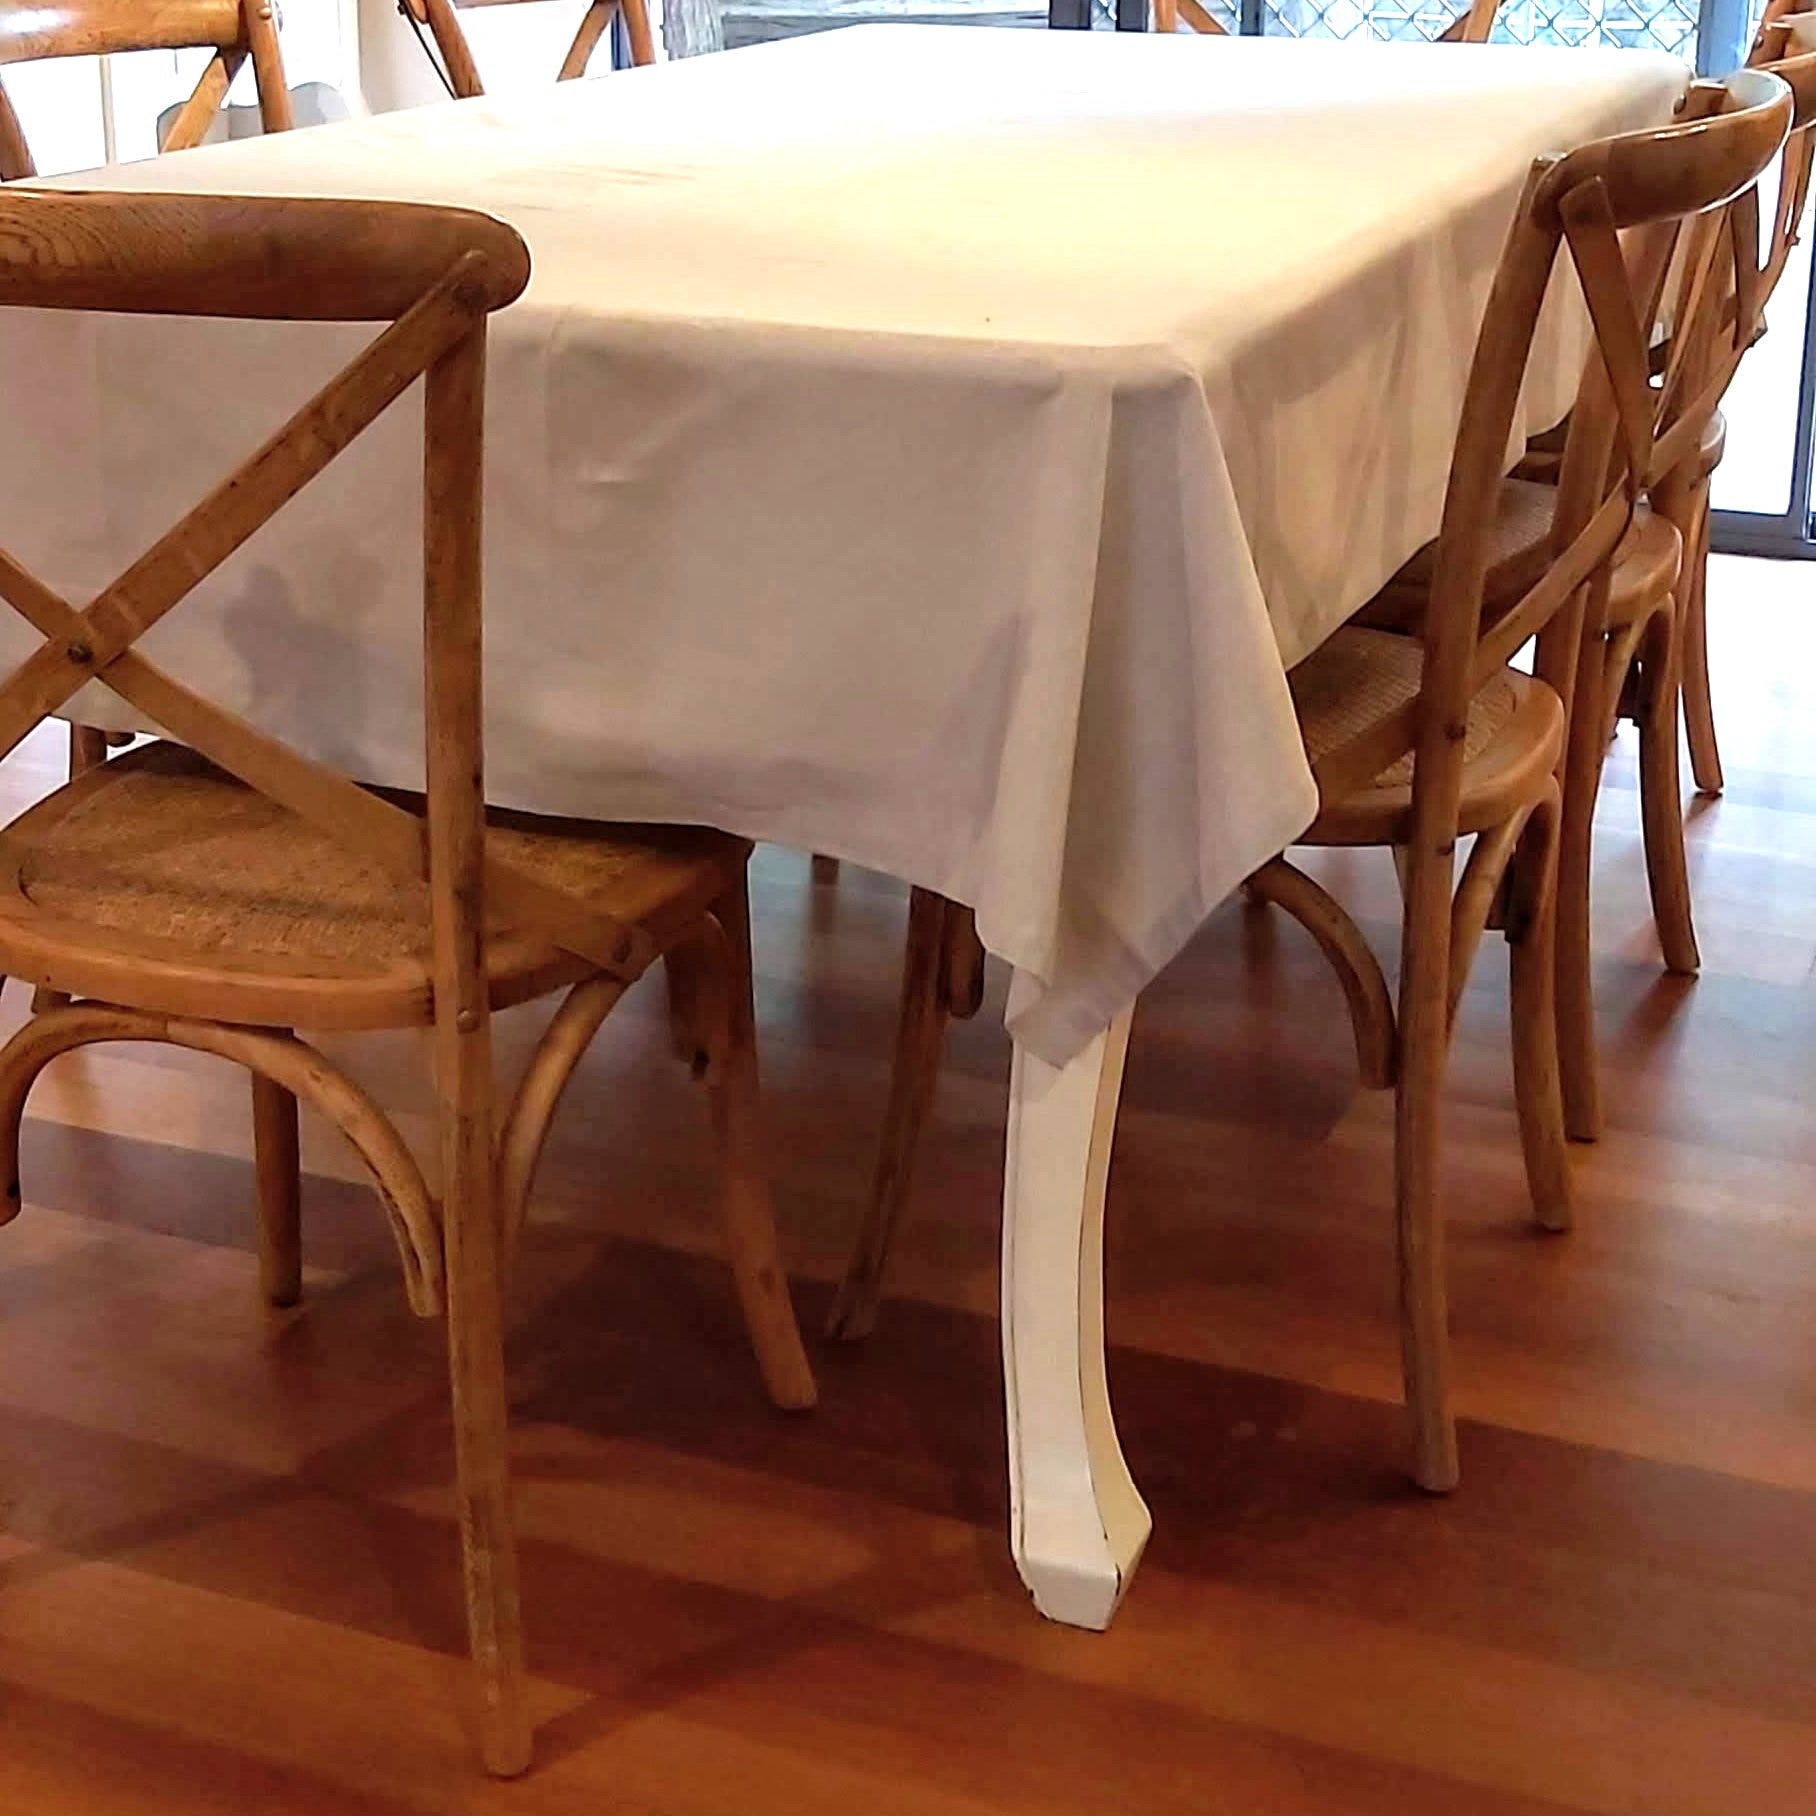 French Country Cotton Ecru Tablecloth